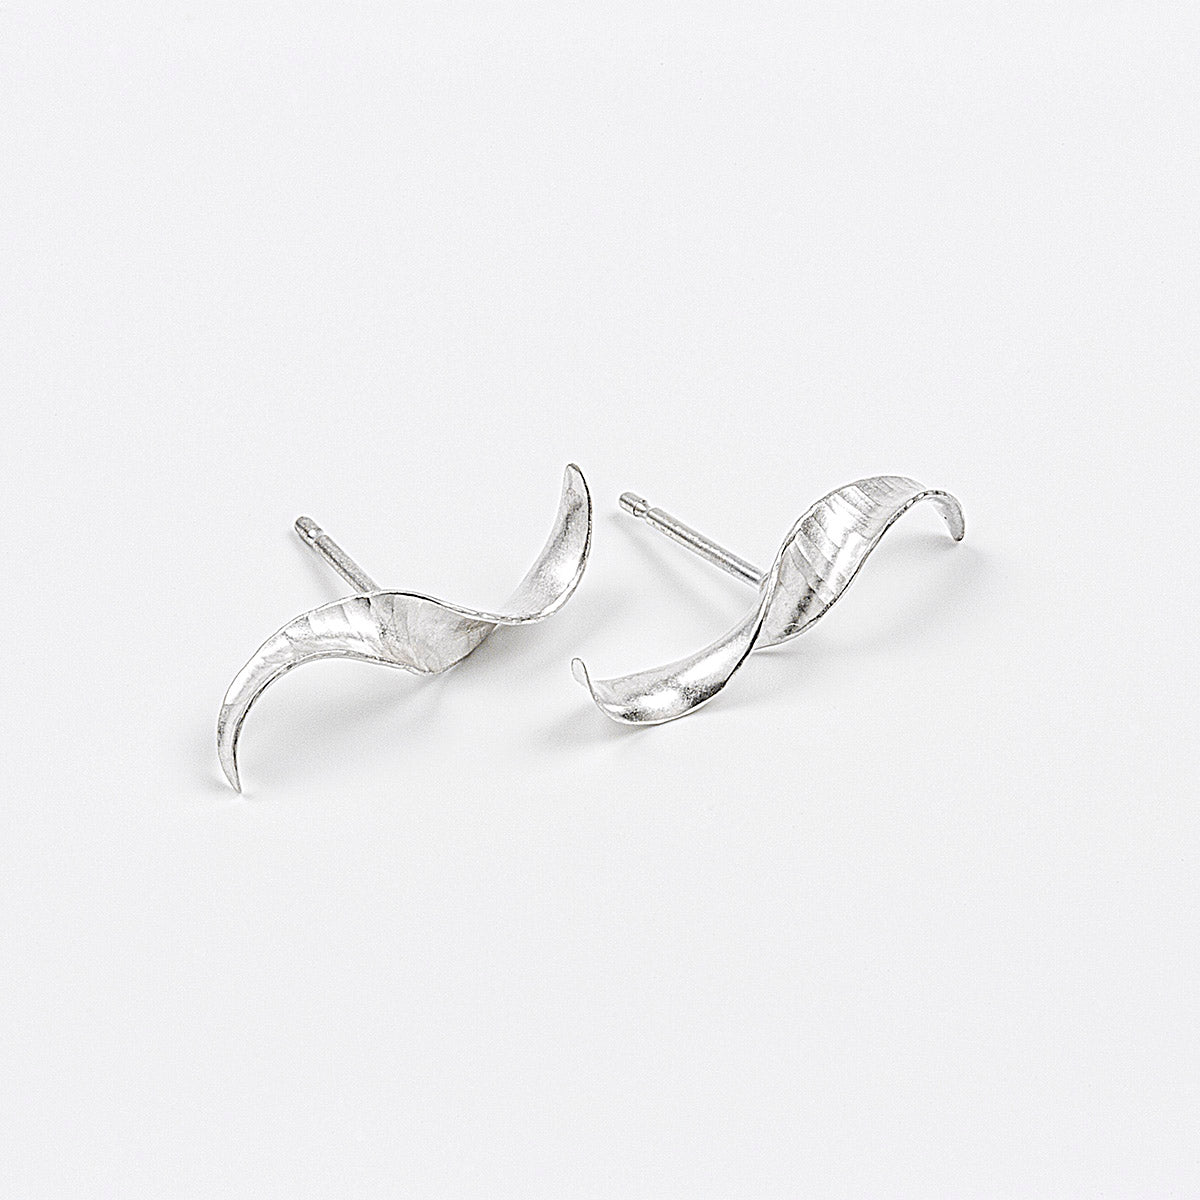 A pair of simple mirror-image silver twist earrings. They each have a stretched-S shape, a hammered texture, non-shiny finish and glittering edges. Shown on a white background, with the two at different angles.